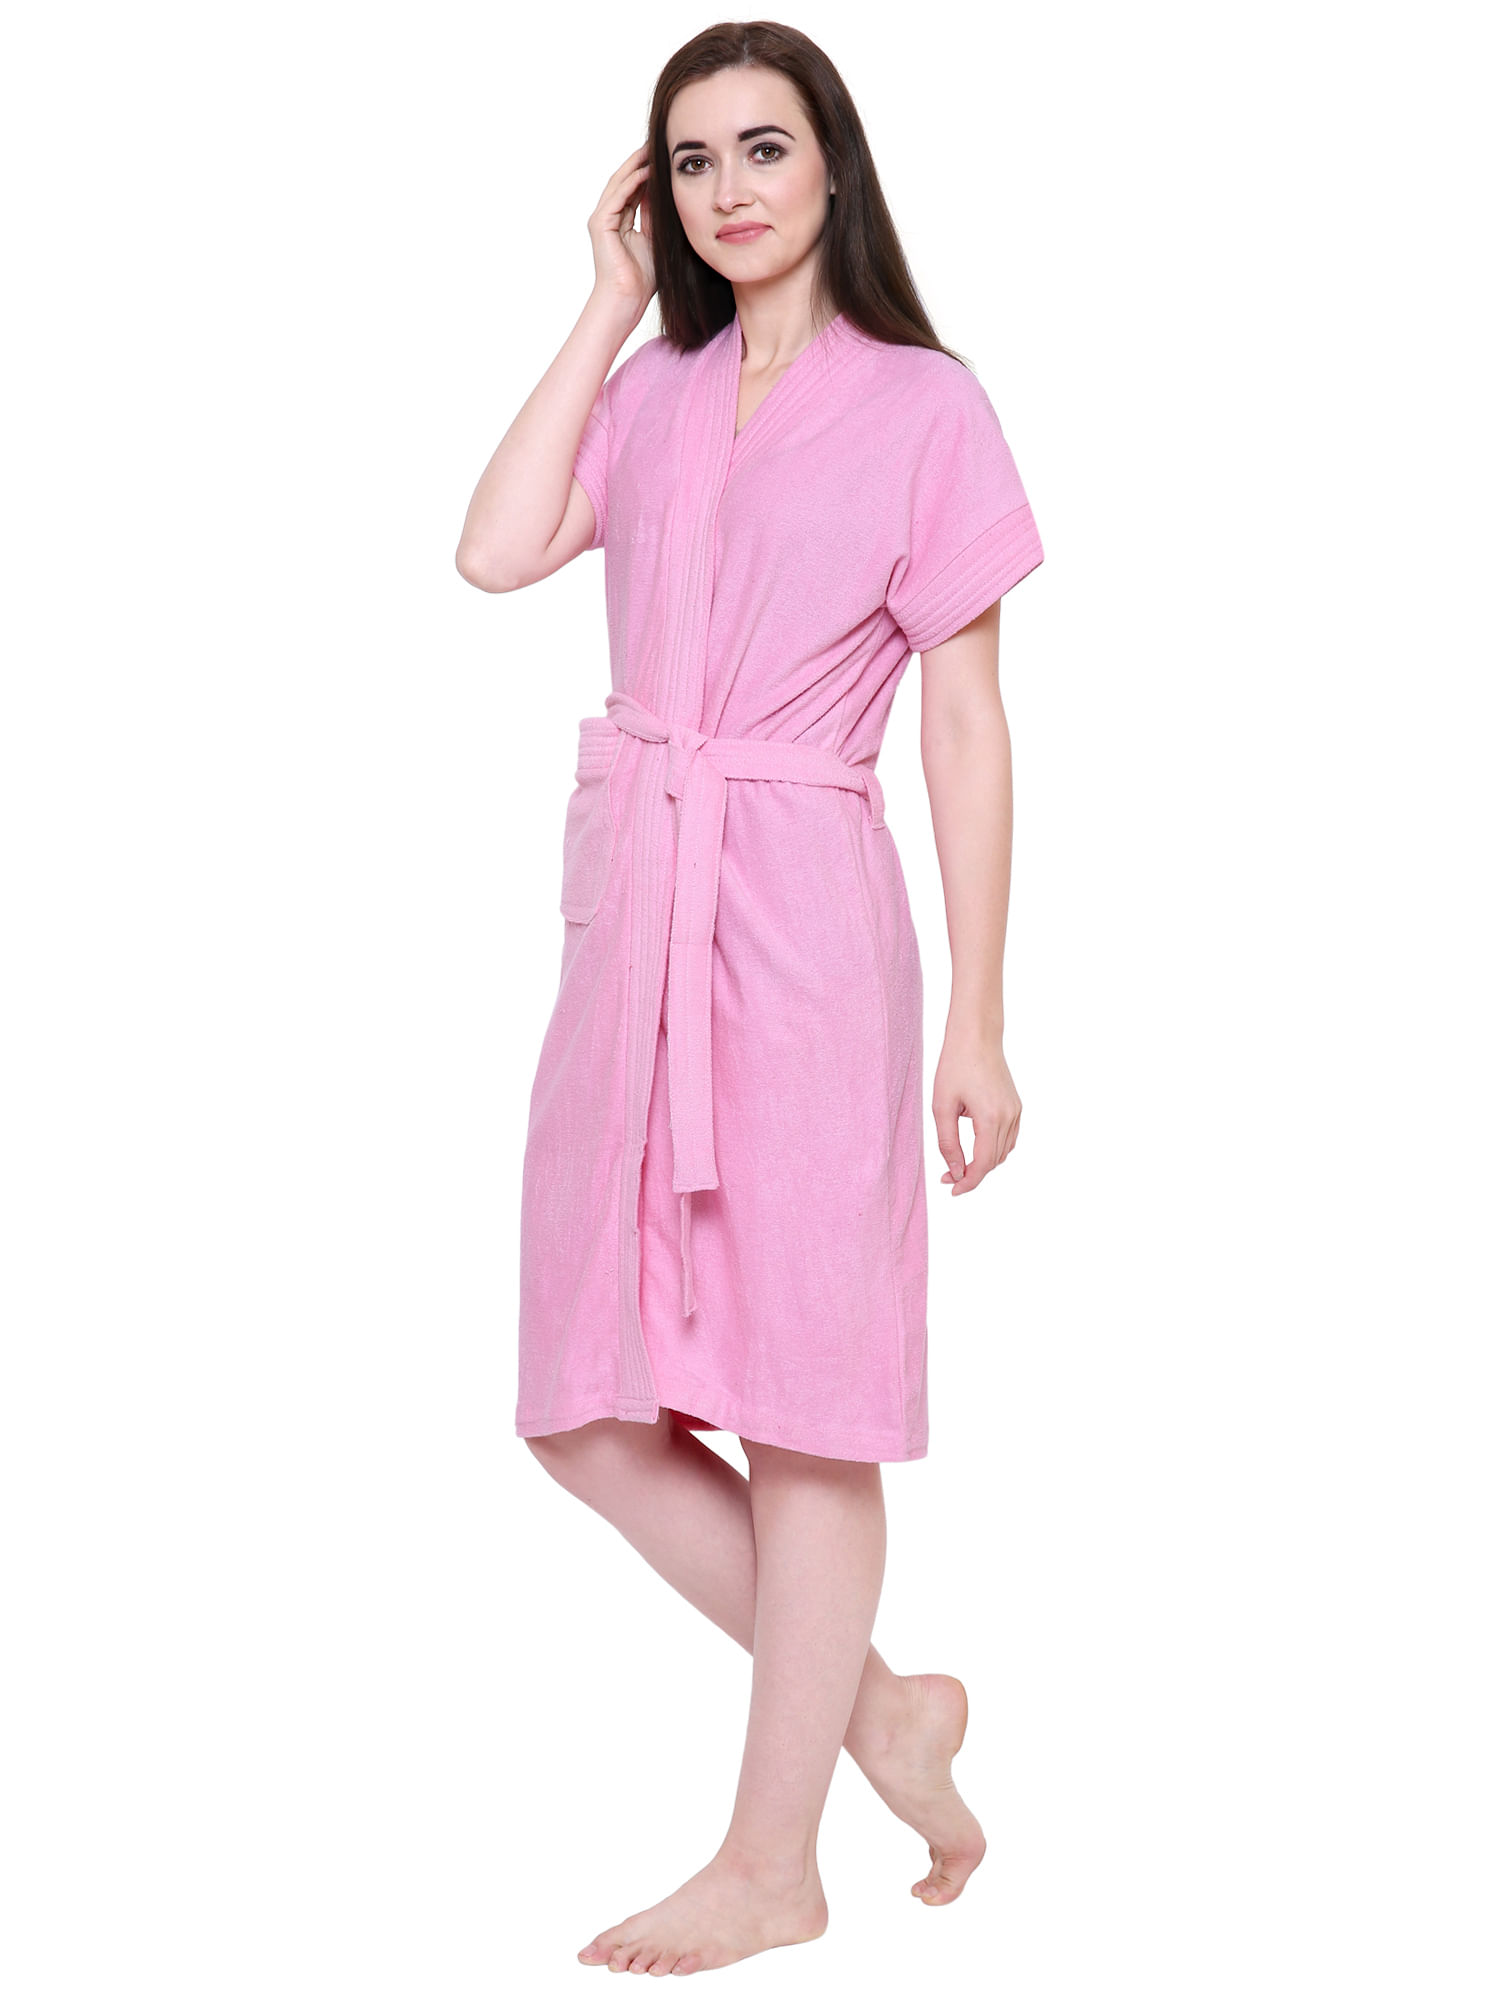 This Boux Avenue Dressing Gown Is Selling Every 10 Minutes - And It's 20%  Off Right Now